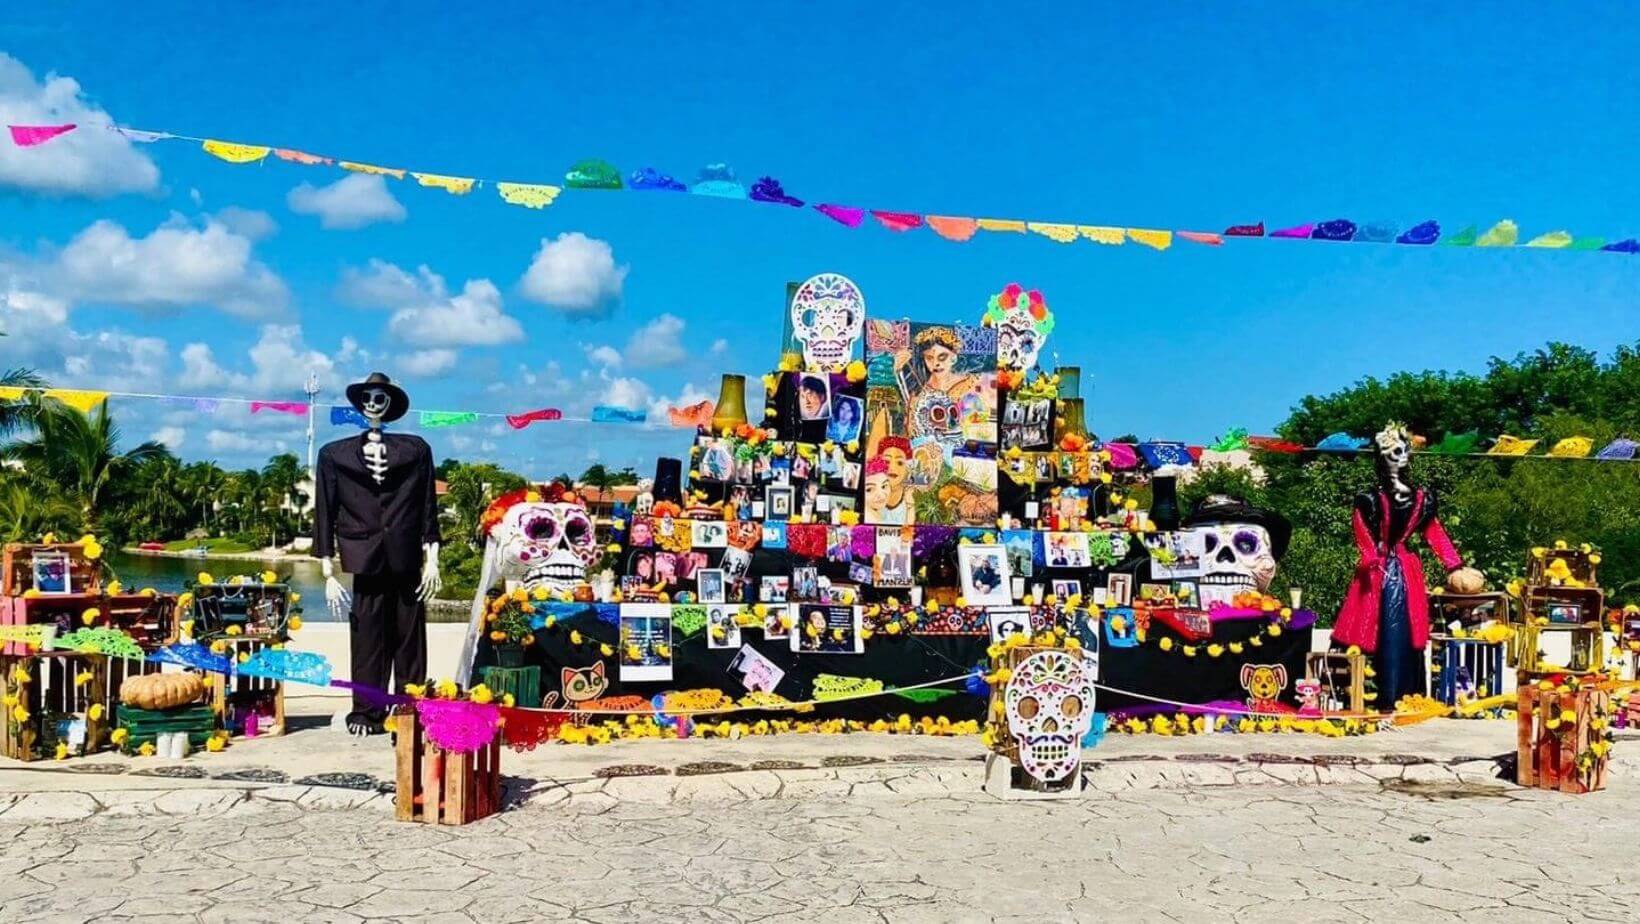 The grand altar set up for the Halloween golf cart parade in puerto aventuras mexico